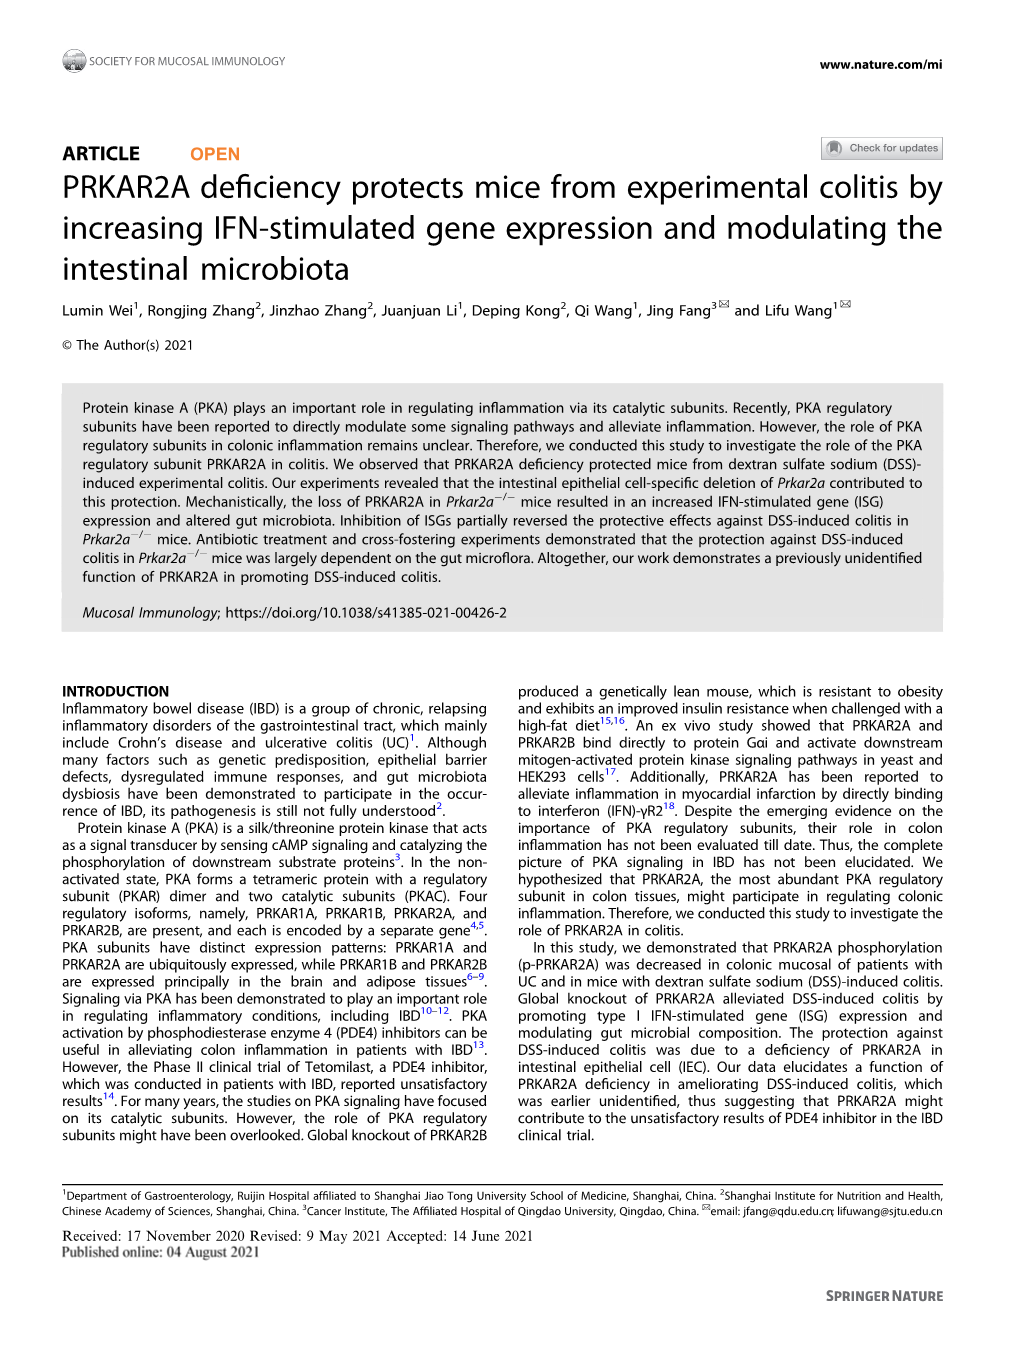 PRKAR2A Deficiency Protects Mice from Experimental Colitis By